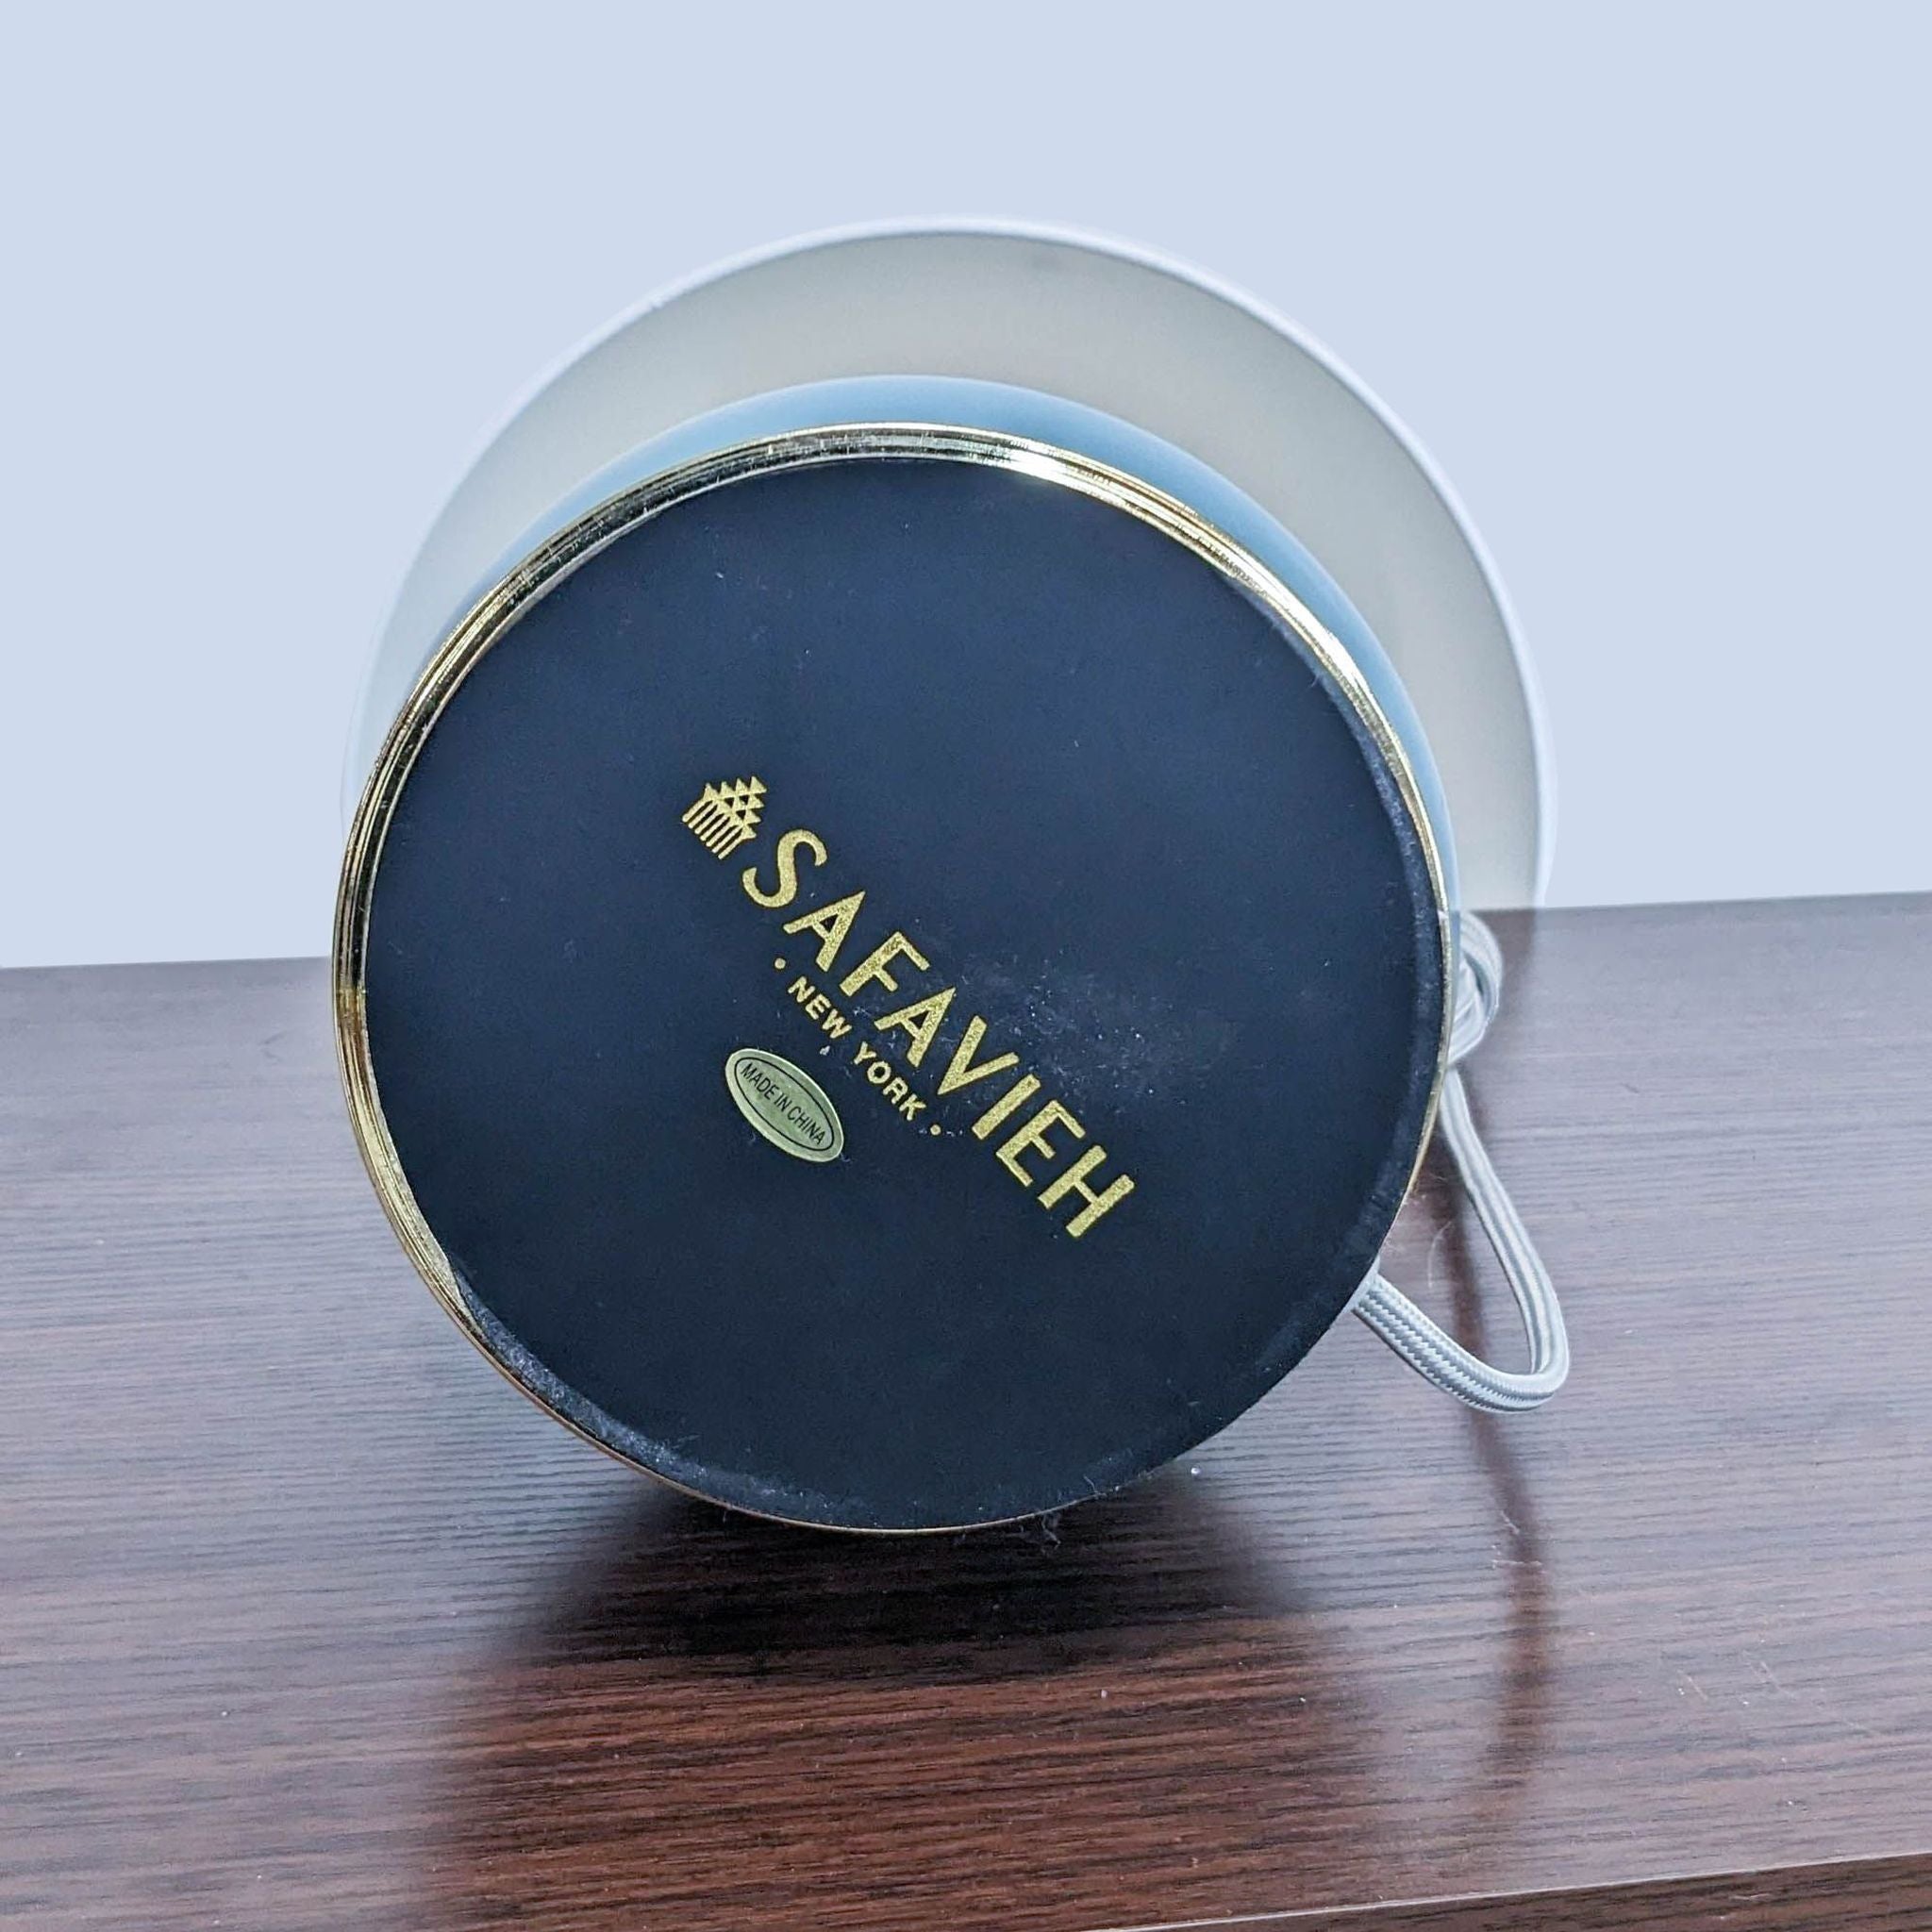 Alt text 2: "Bottom view of a Safavieh lamp showcasing the brand's logo on the black surface with a gold rim and power cable."